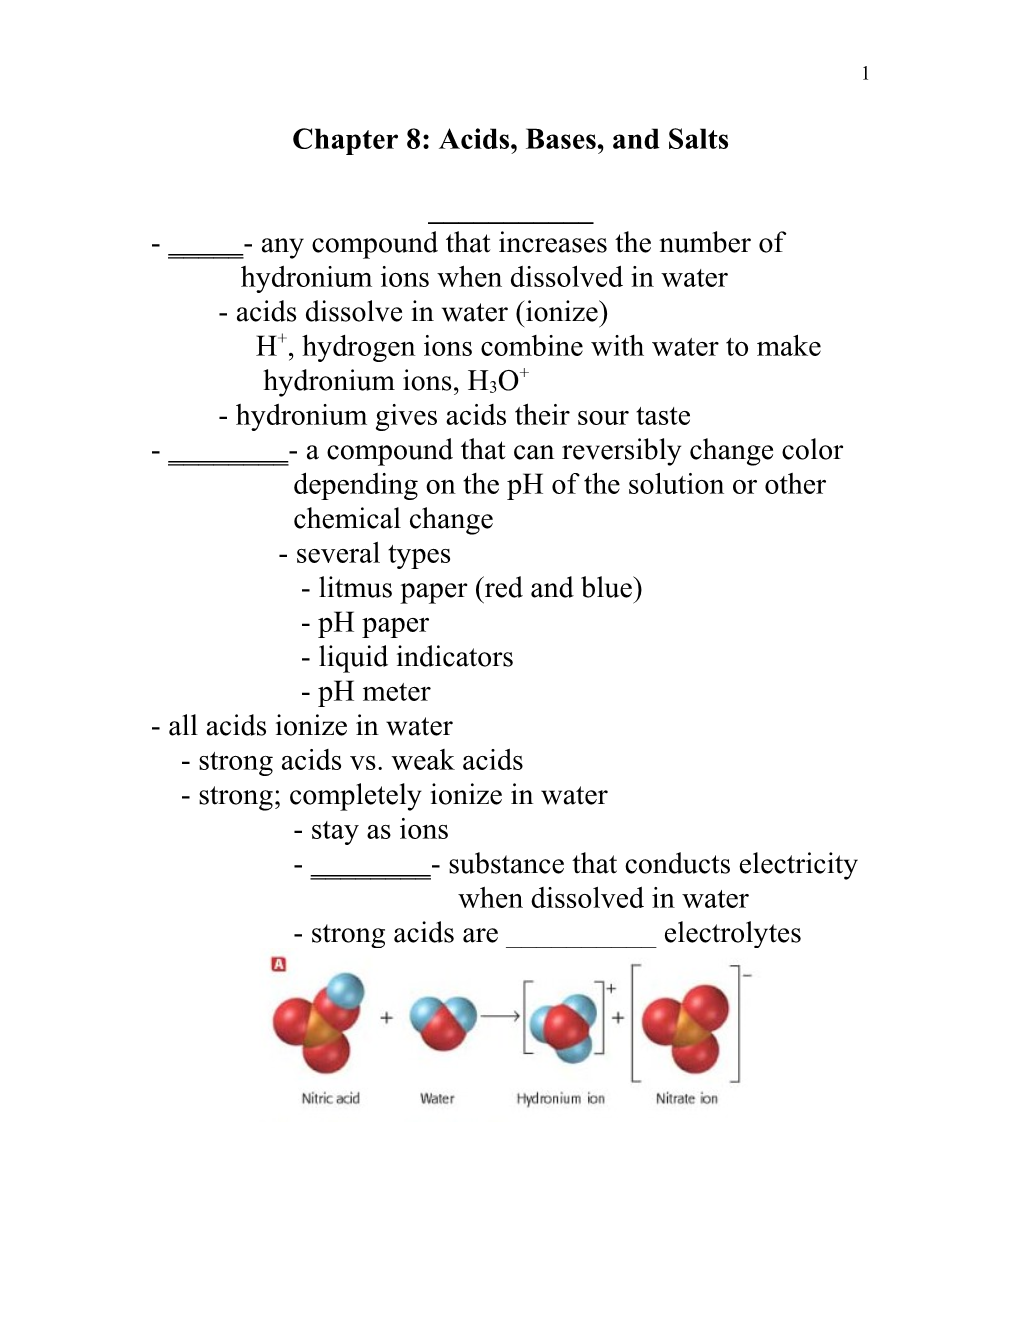 Chapter 8: Acids, Bases, and Salts